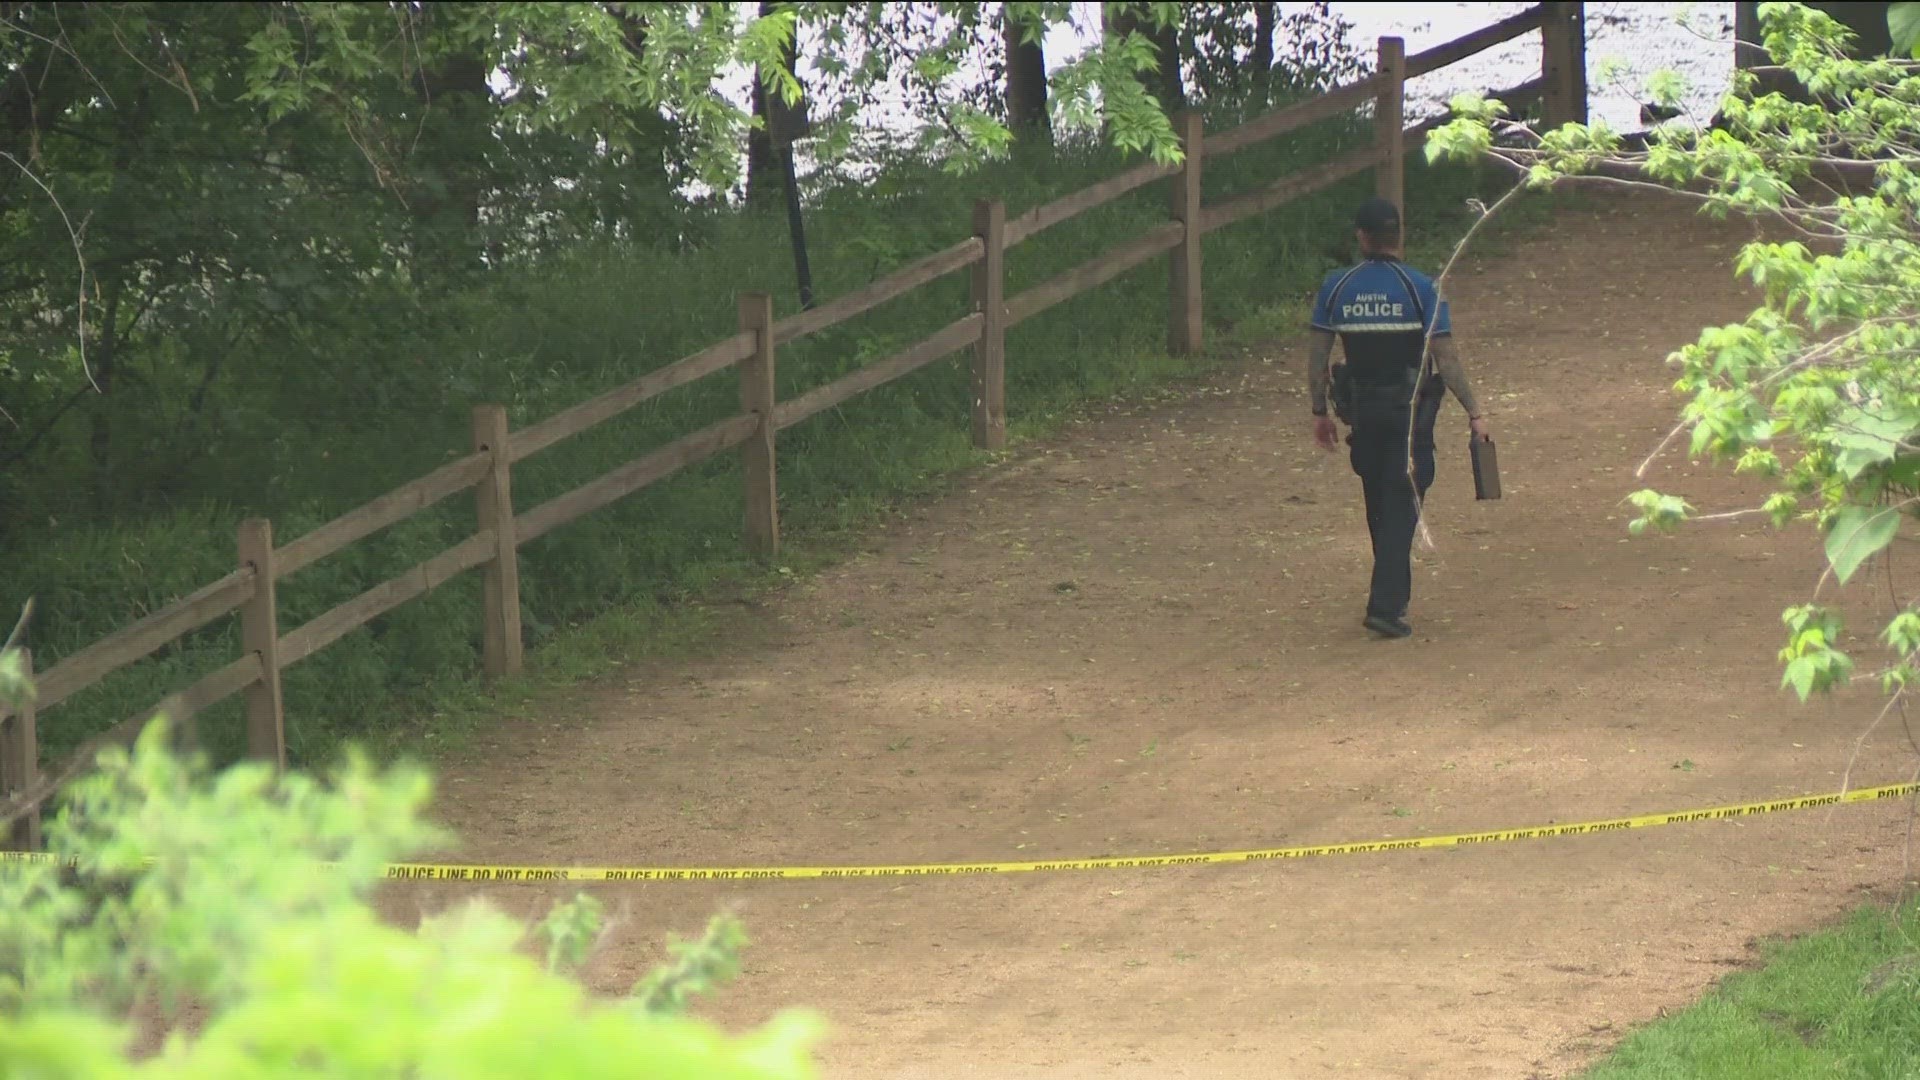 A body was found near the trail along Lady Bird Lake on Tuesday.